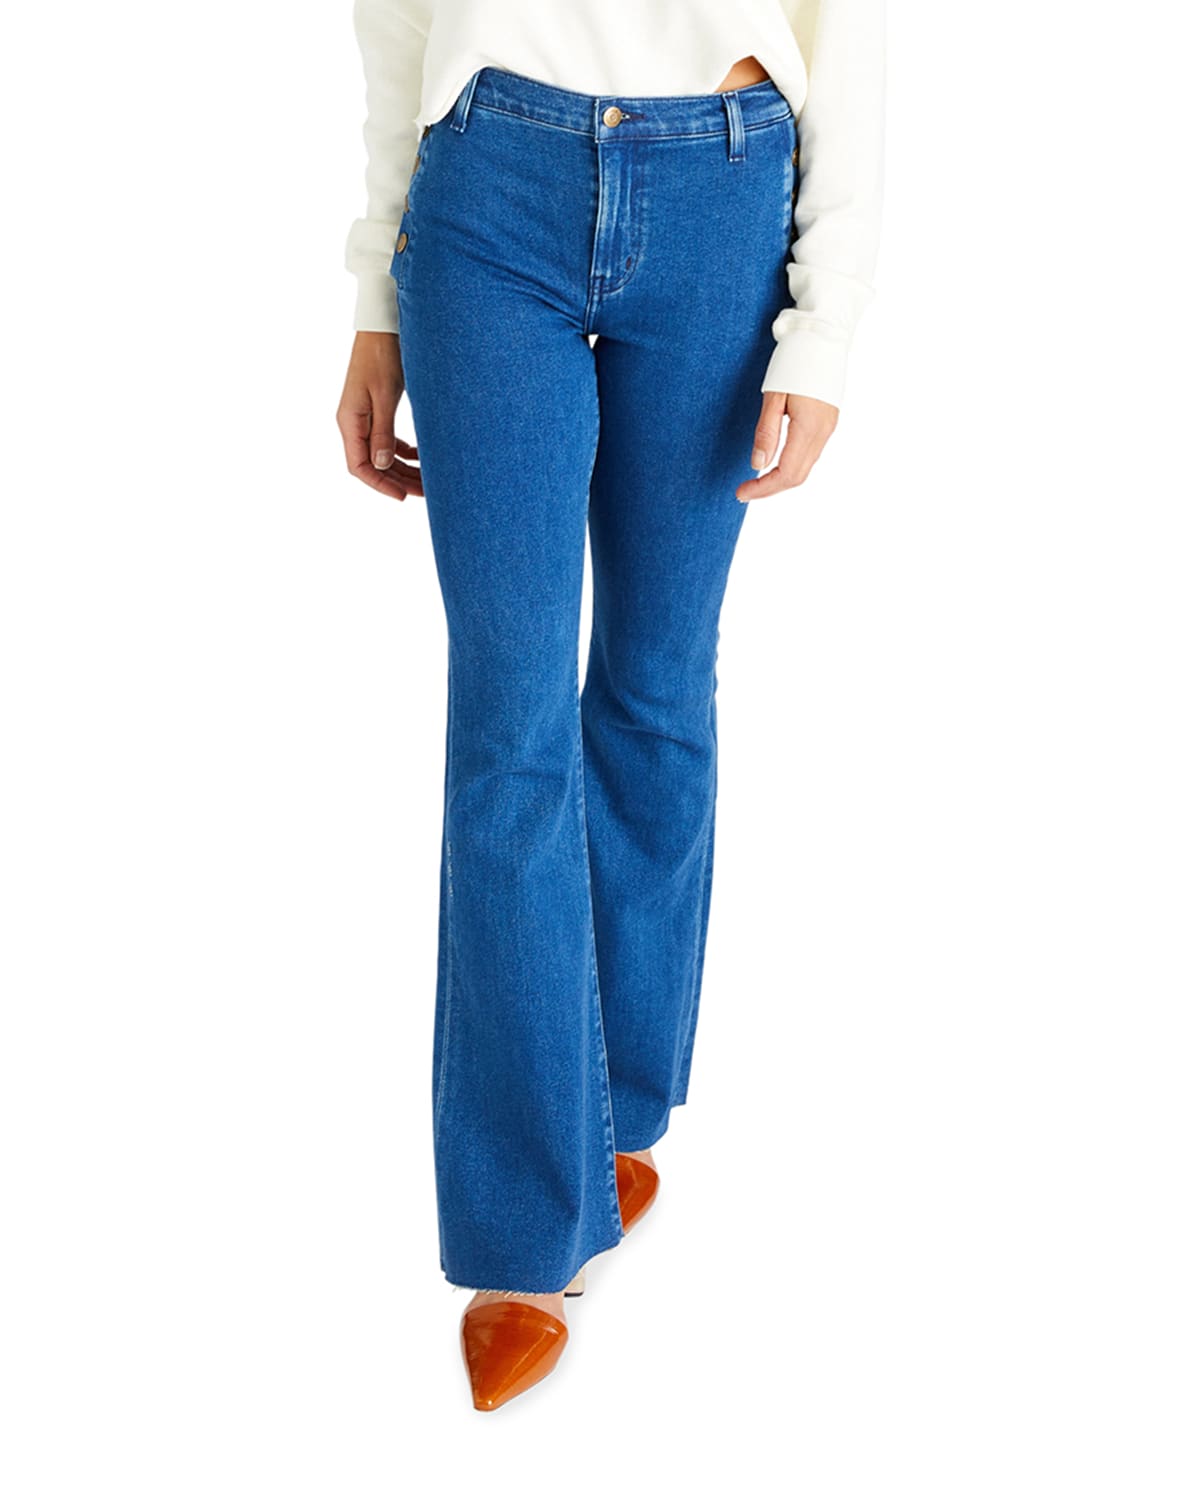 Nina Button-Fly Flare Jeans